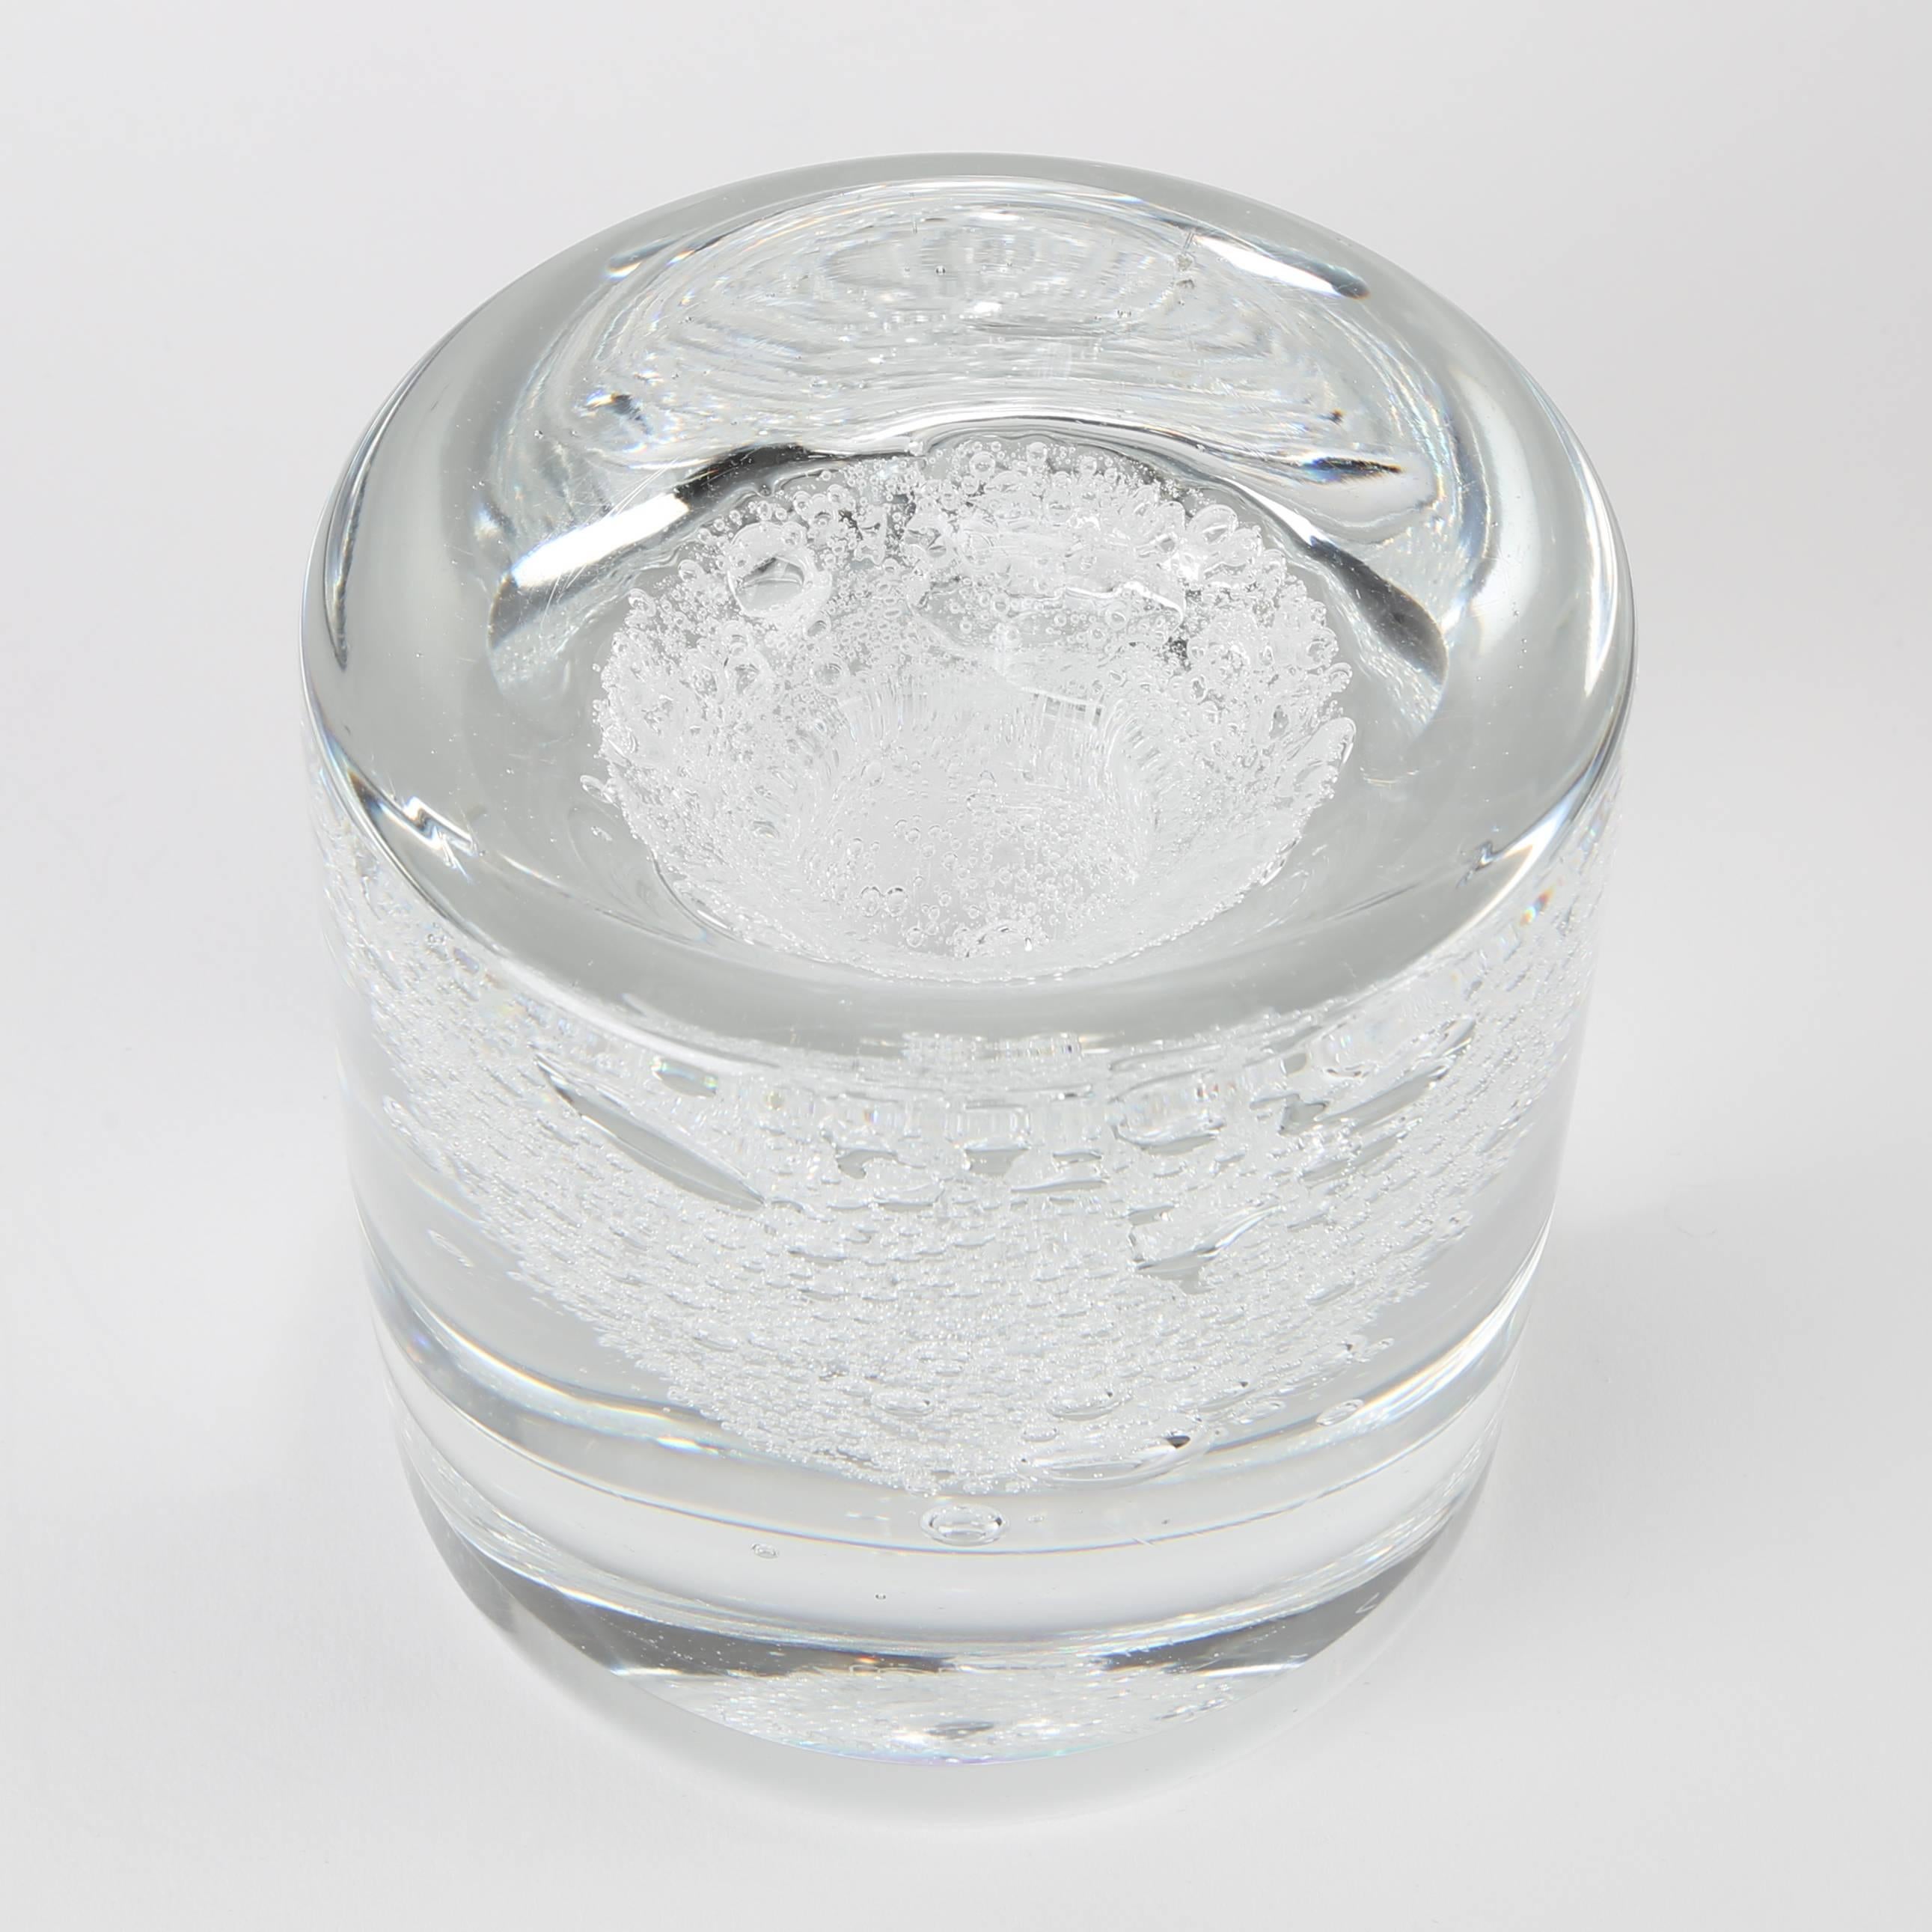 Mid-20th Century Clear Crystal Bubble Vase by Floris Meydam for Leerdam Unica, Circa 1960s For Sale